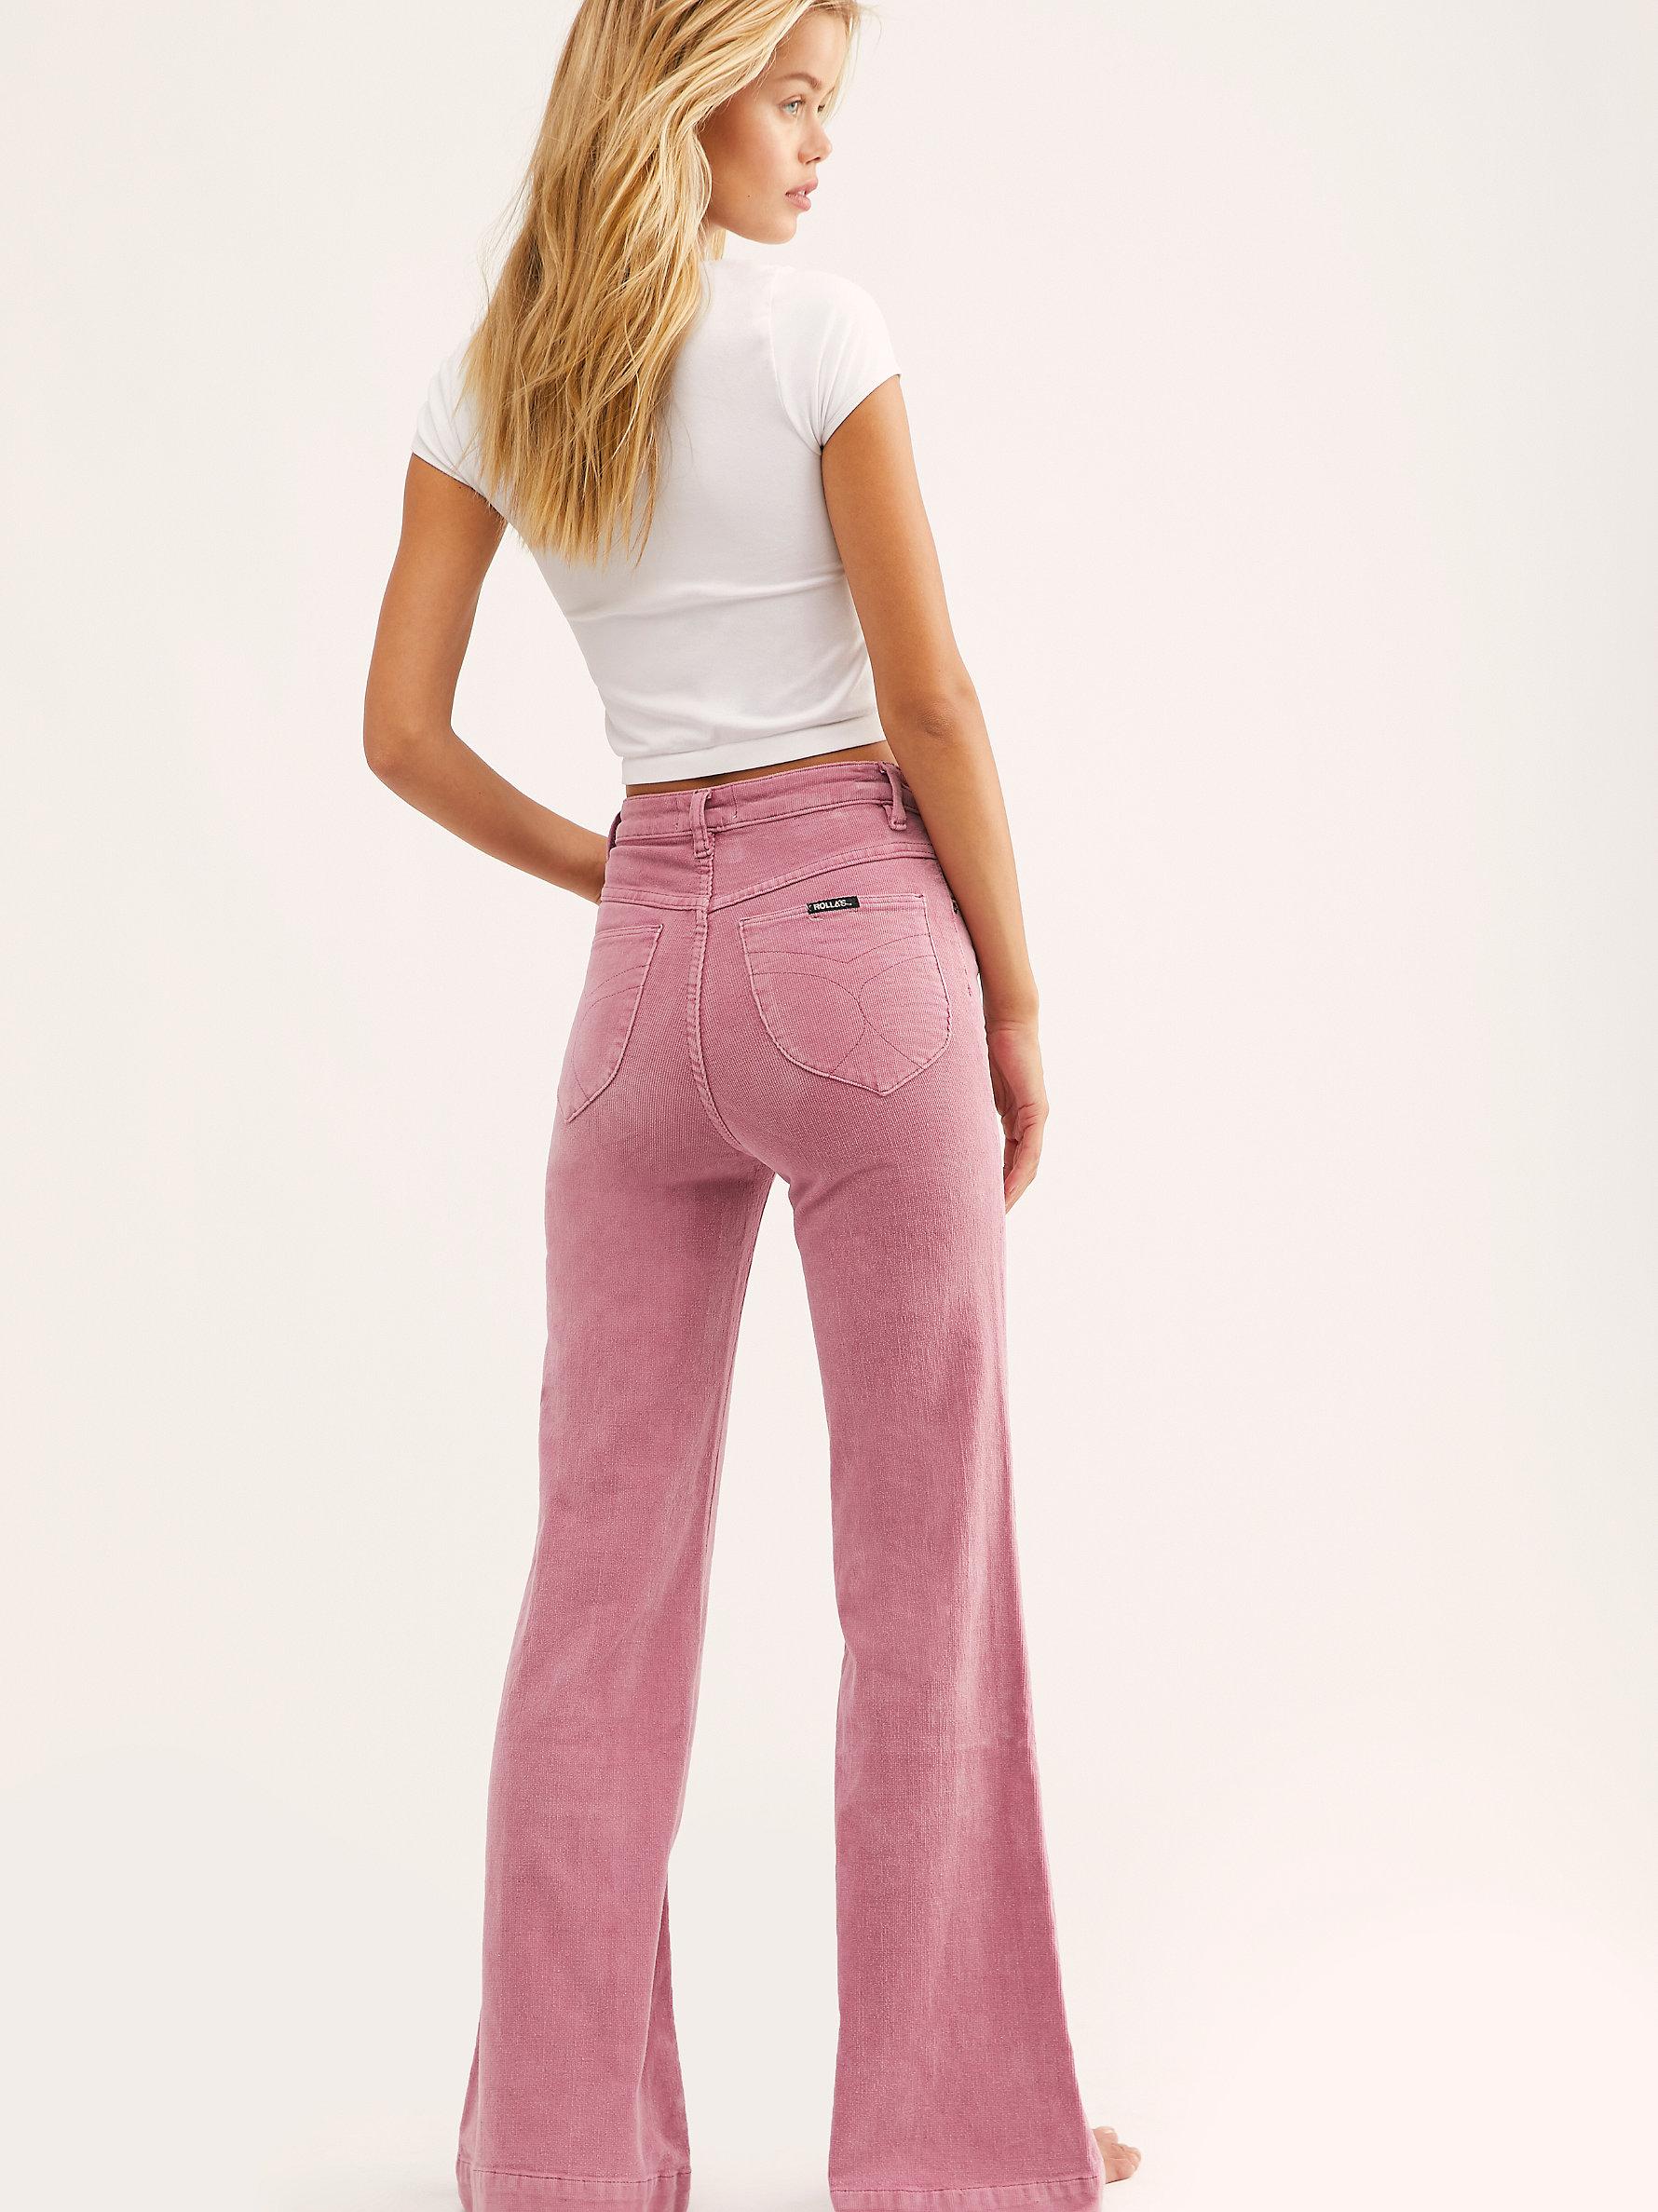 Free People Rolla's East Coast Cord Flare Pants in Pink